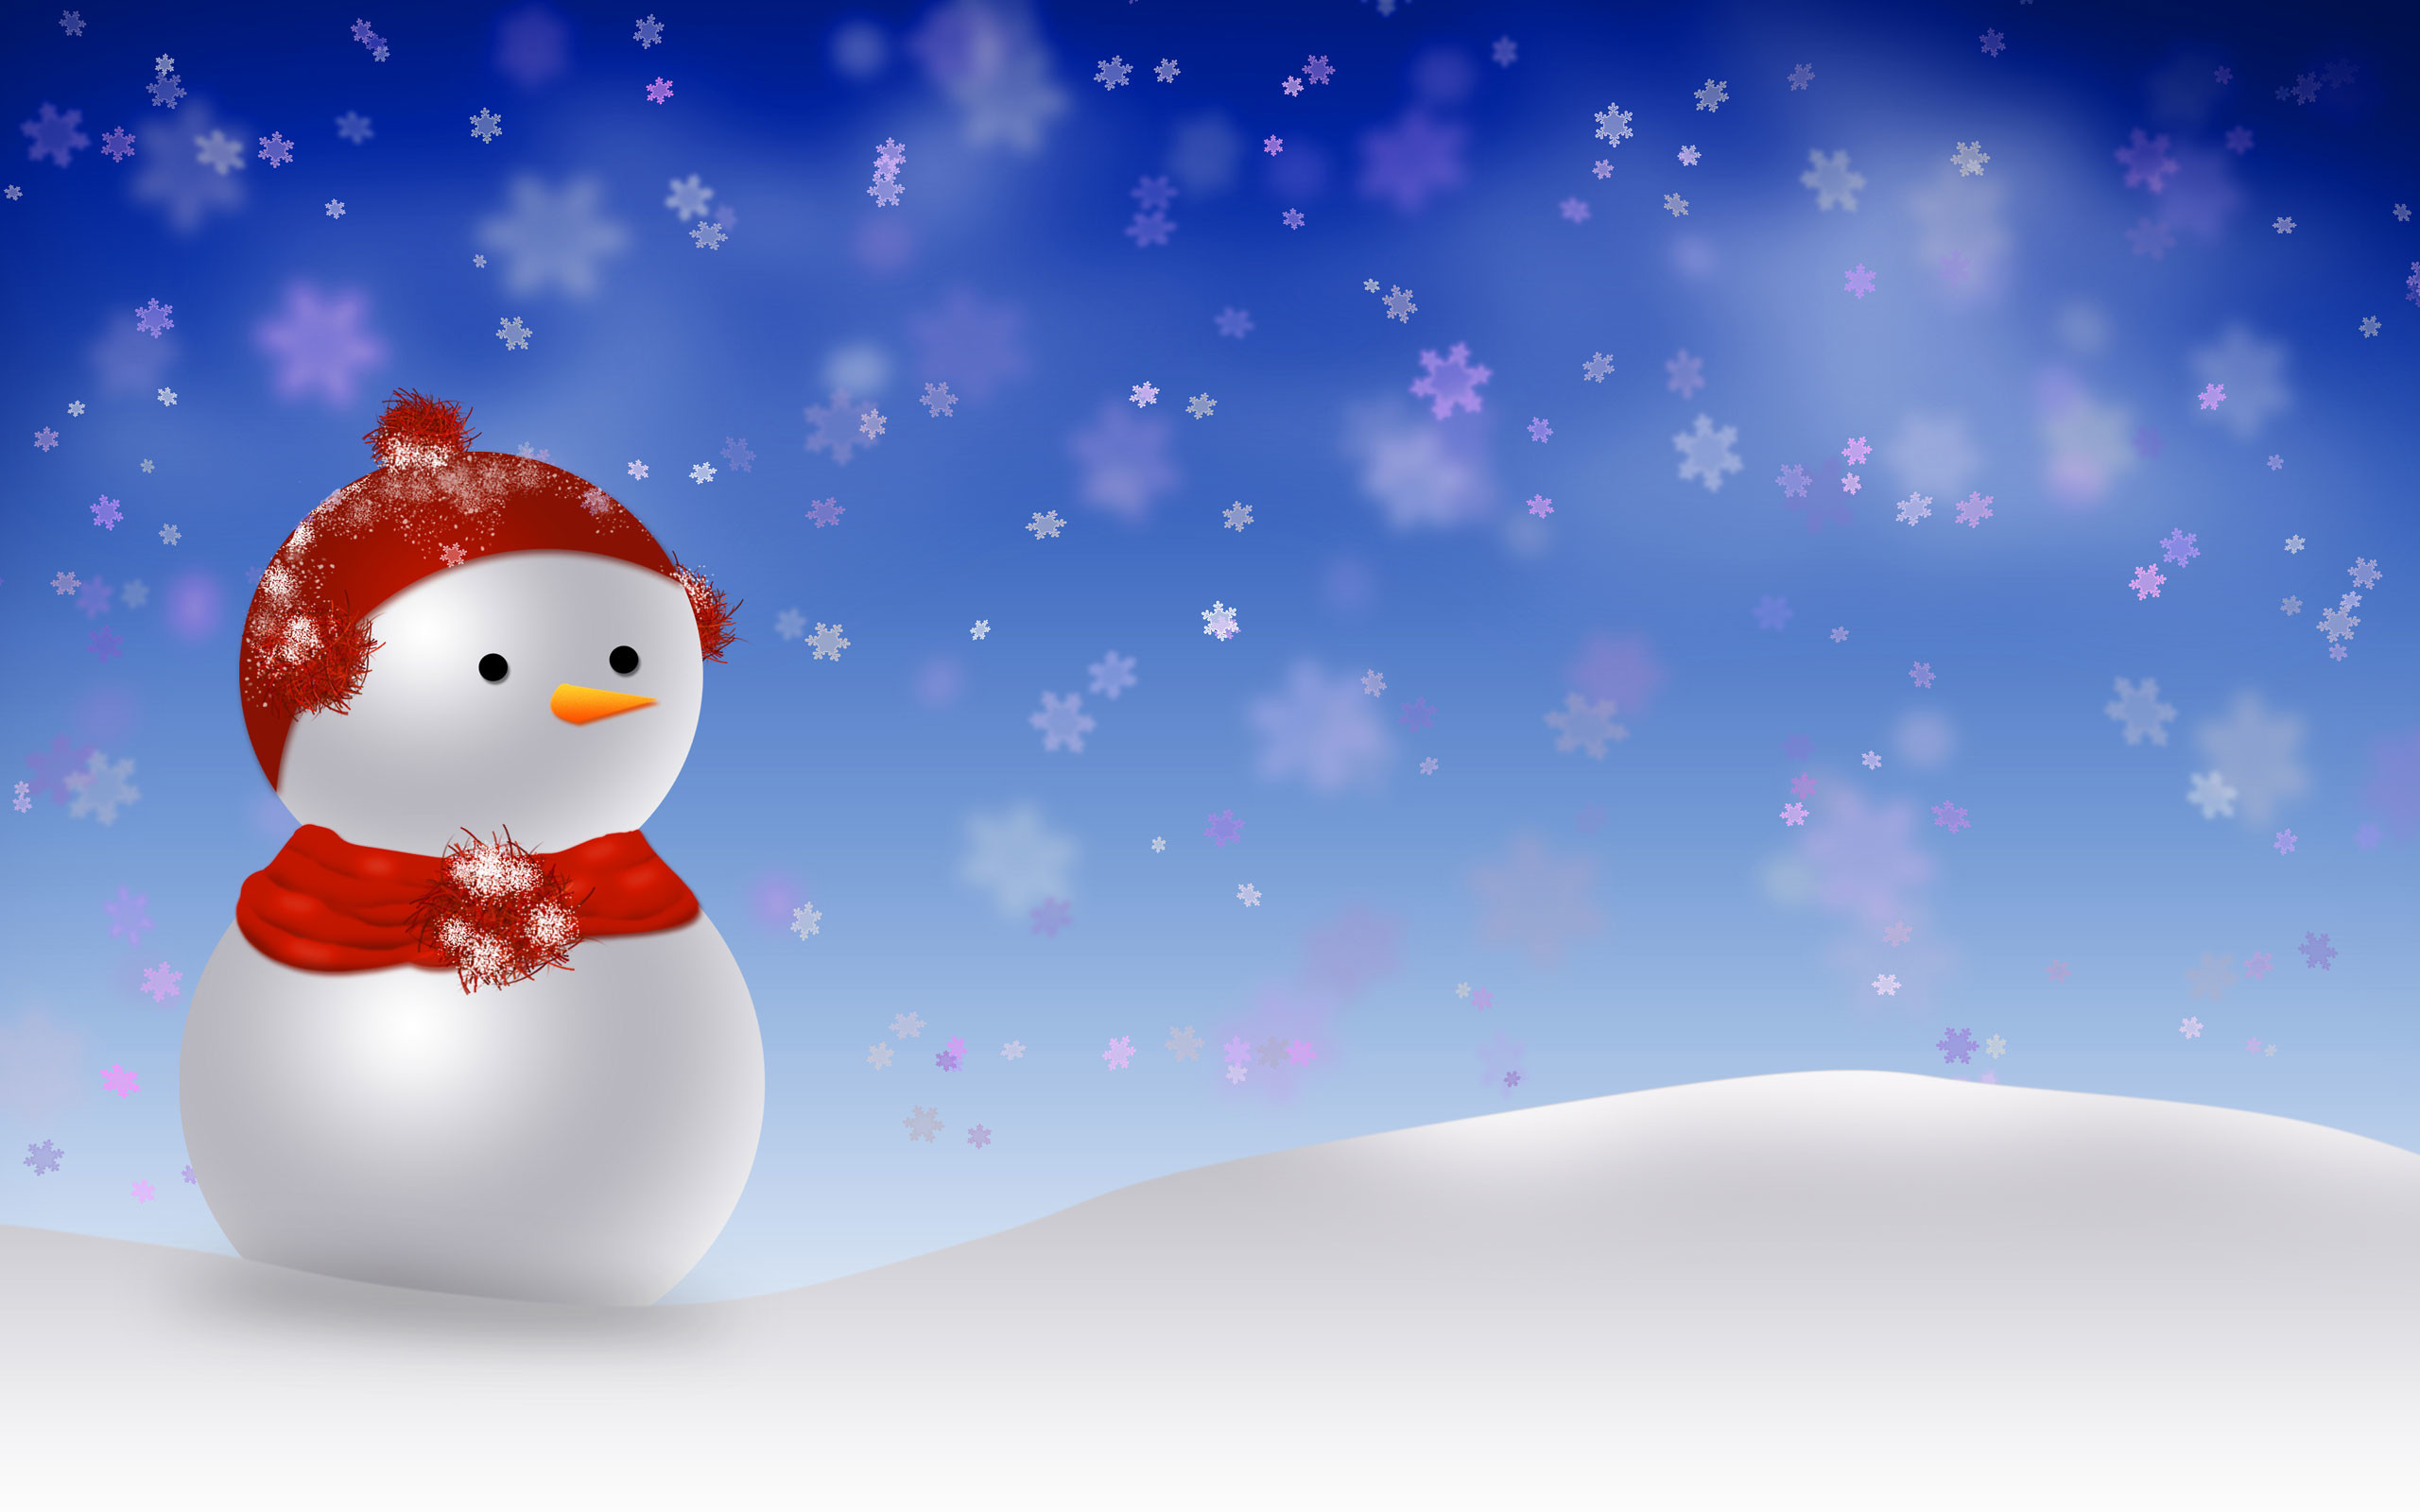 Animated Christmas Wallpapers For We are sure that each of you have your own favourite animated Christmas wallpaper and you love it makes you feel special